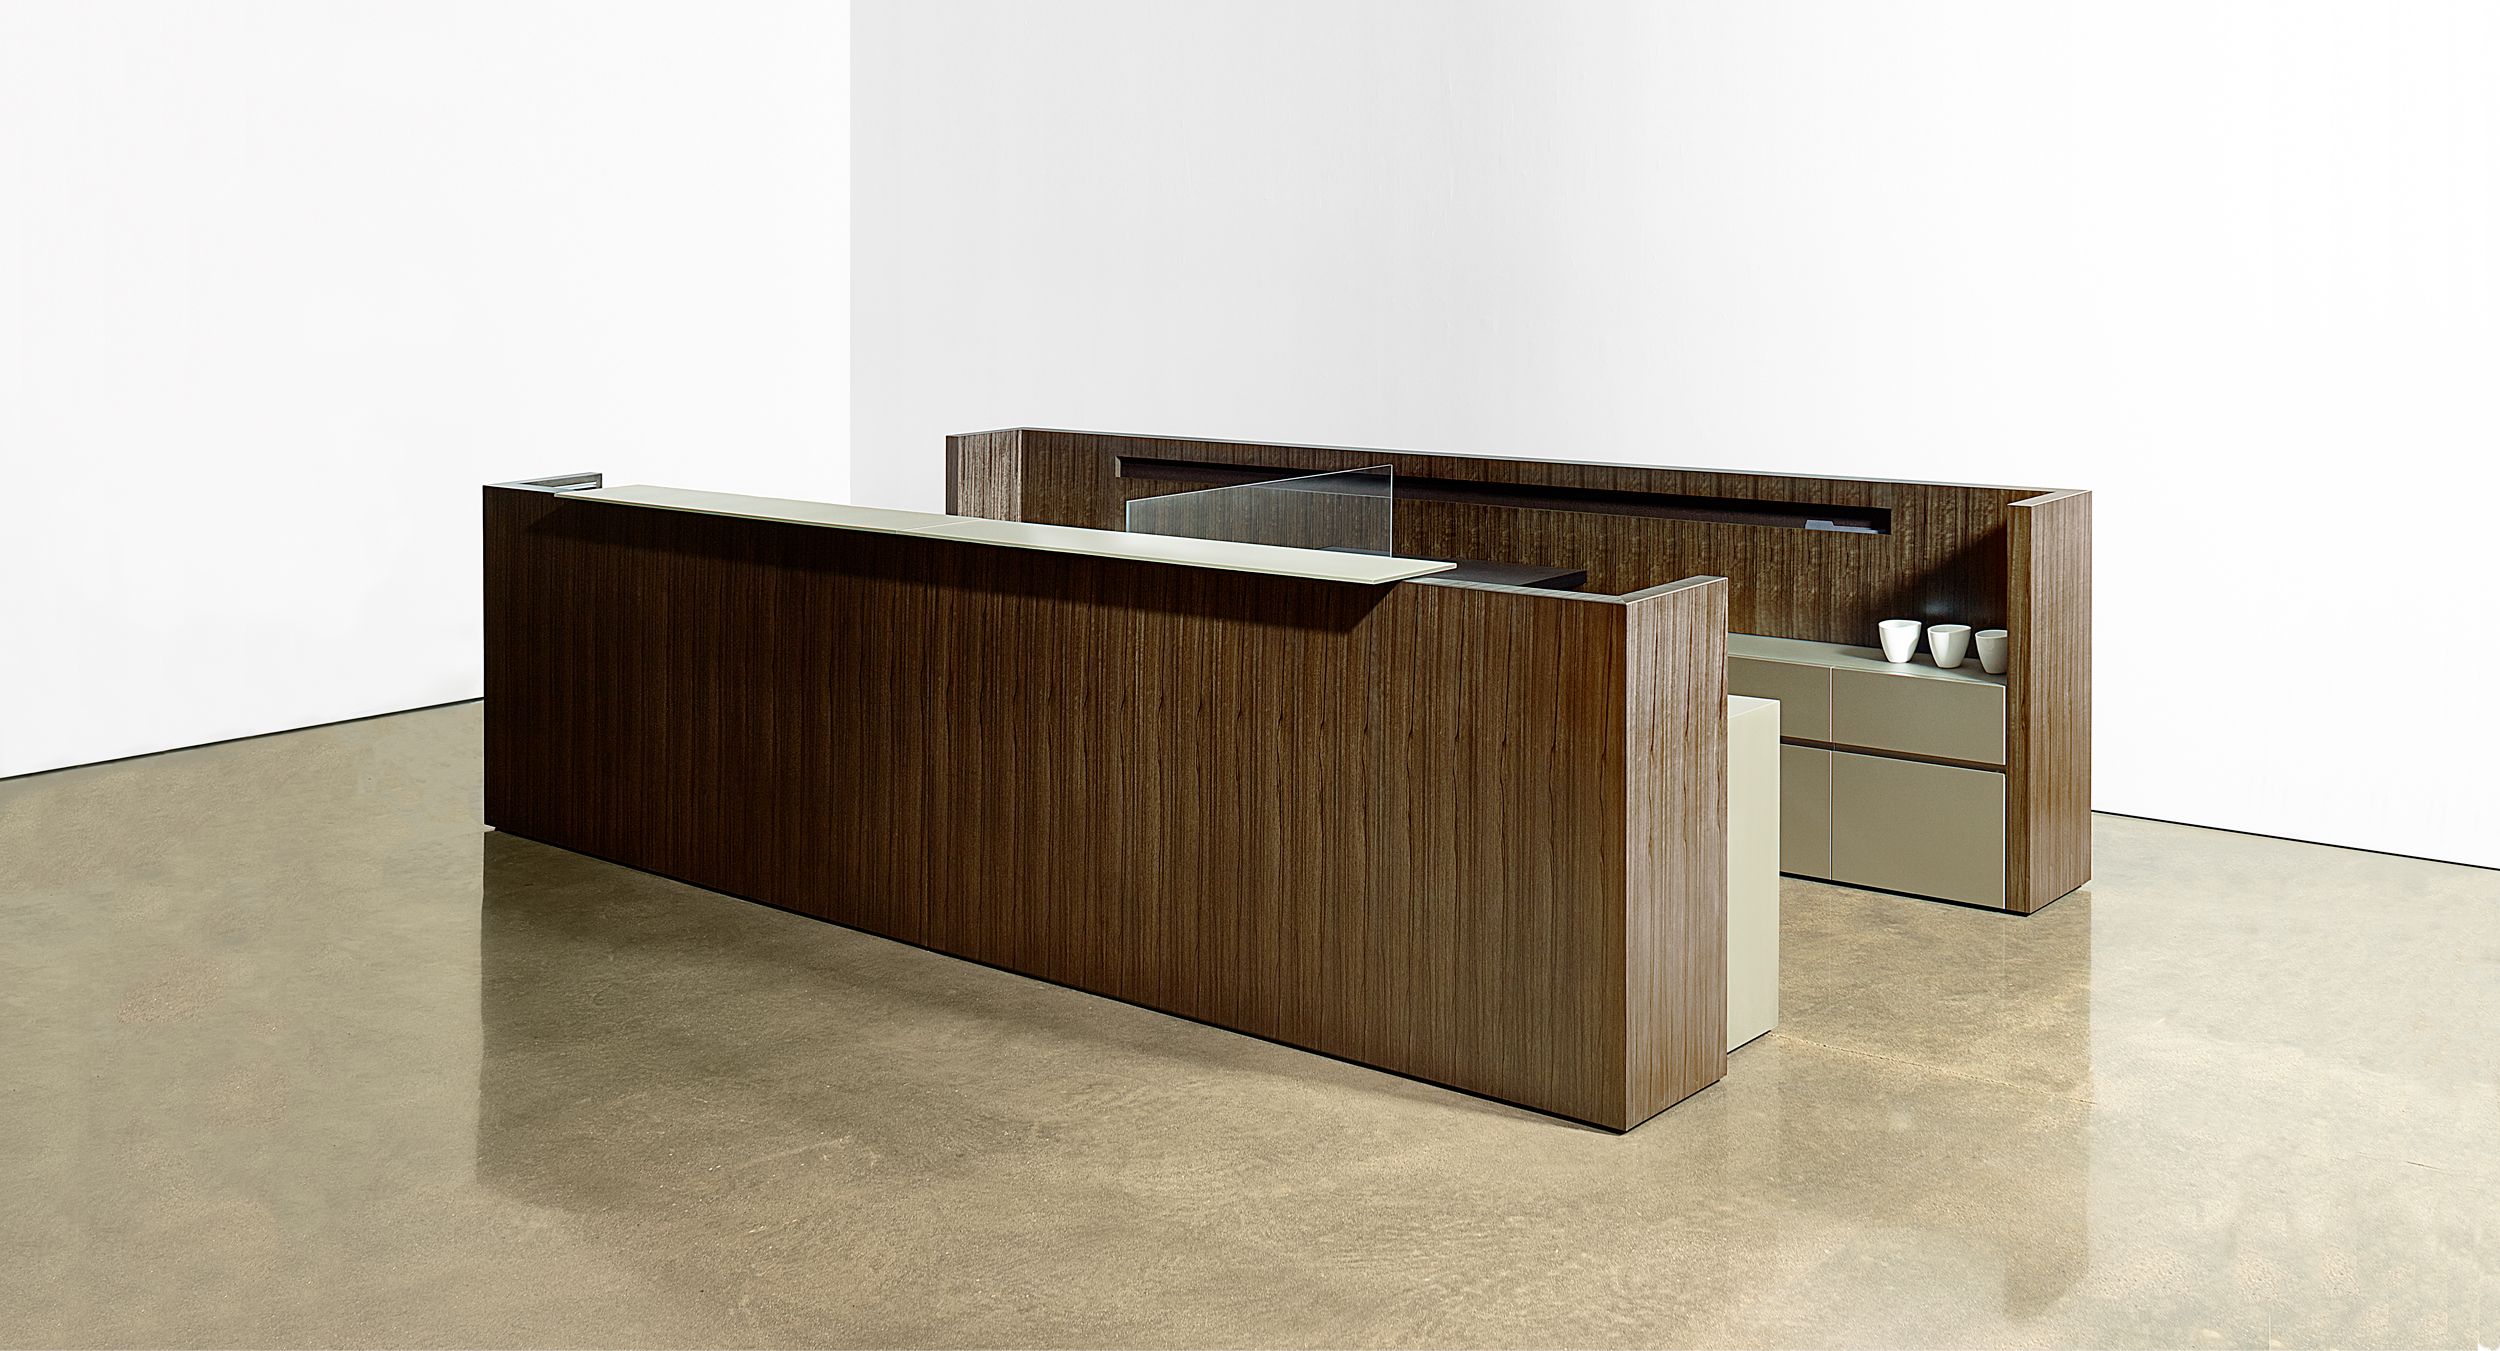 Foundry integrates technology, thoughtful work tools, and complementary materials into the most well-crafted, beautiful millwork system imaginable.